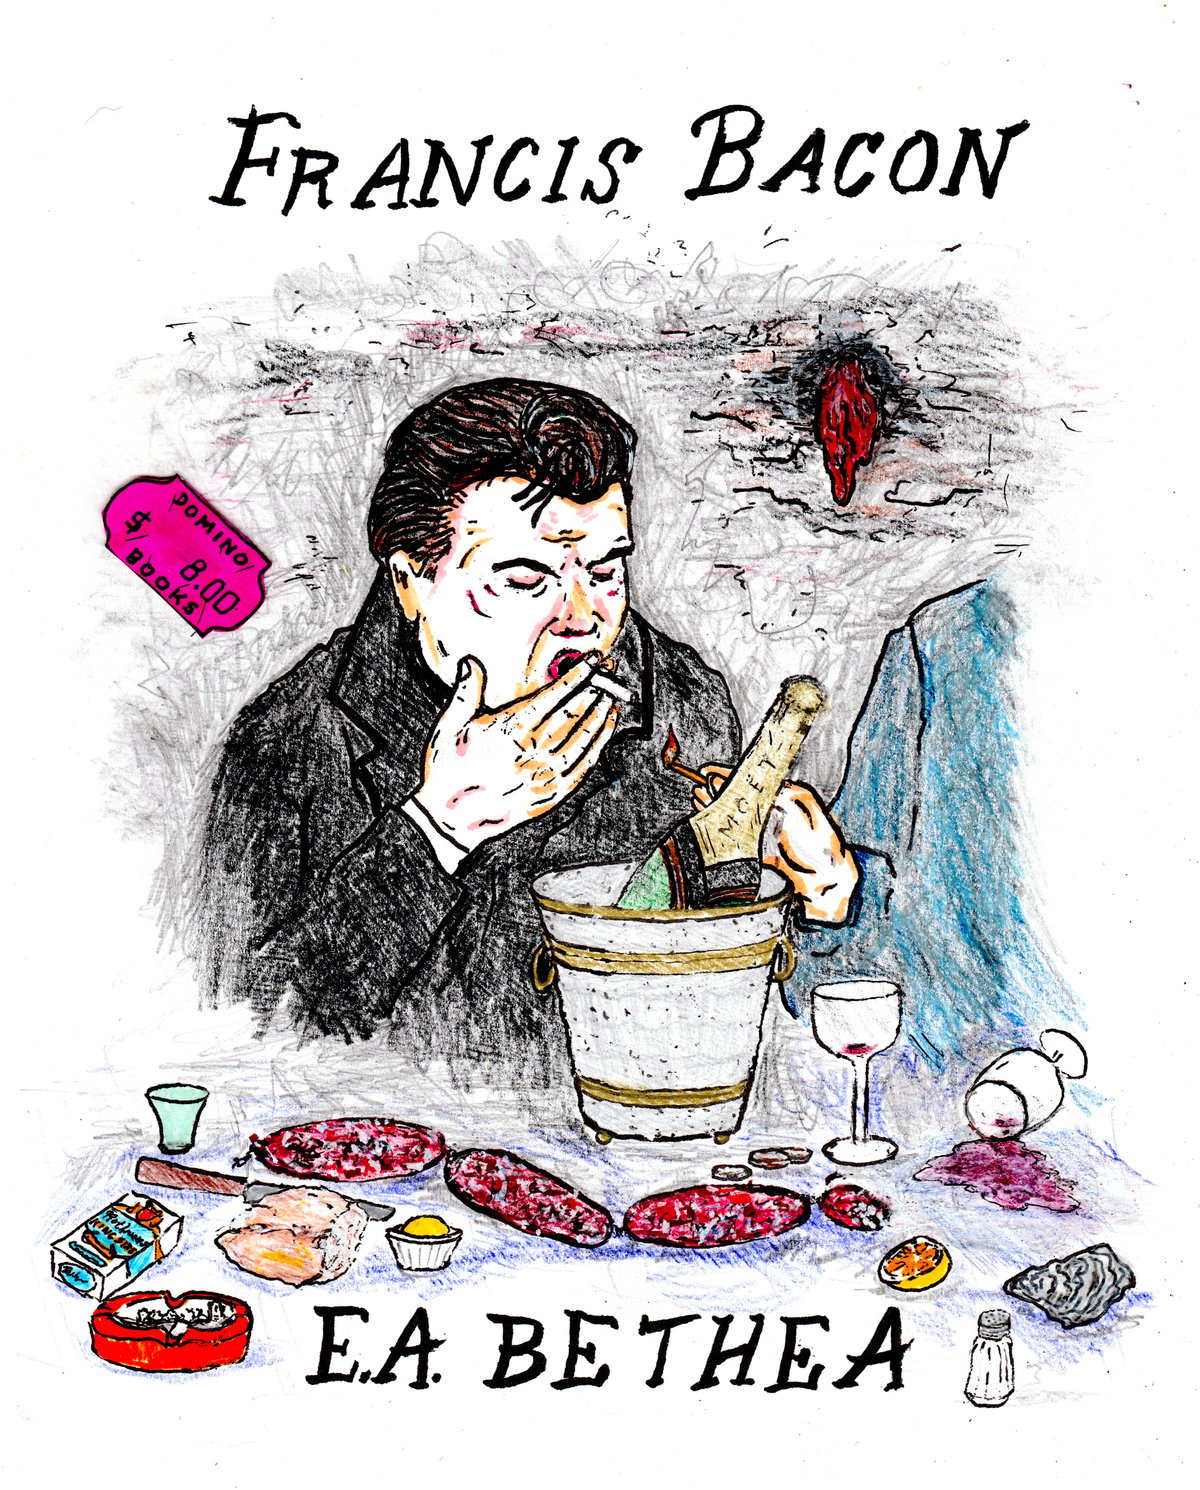 Image of Francis Bacon